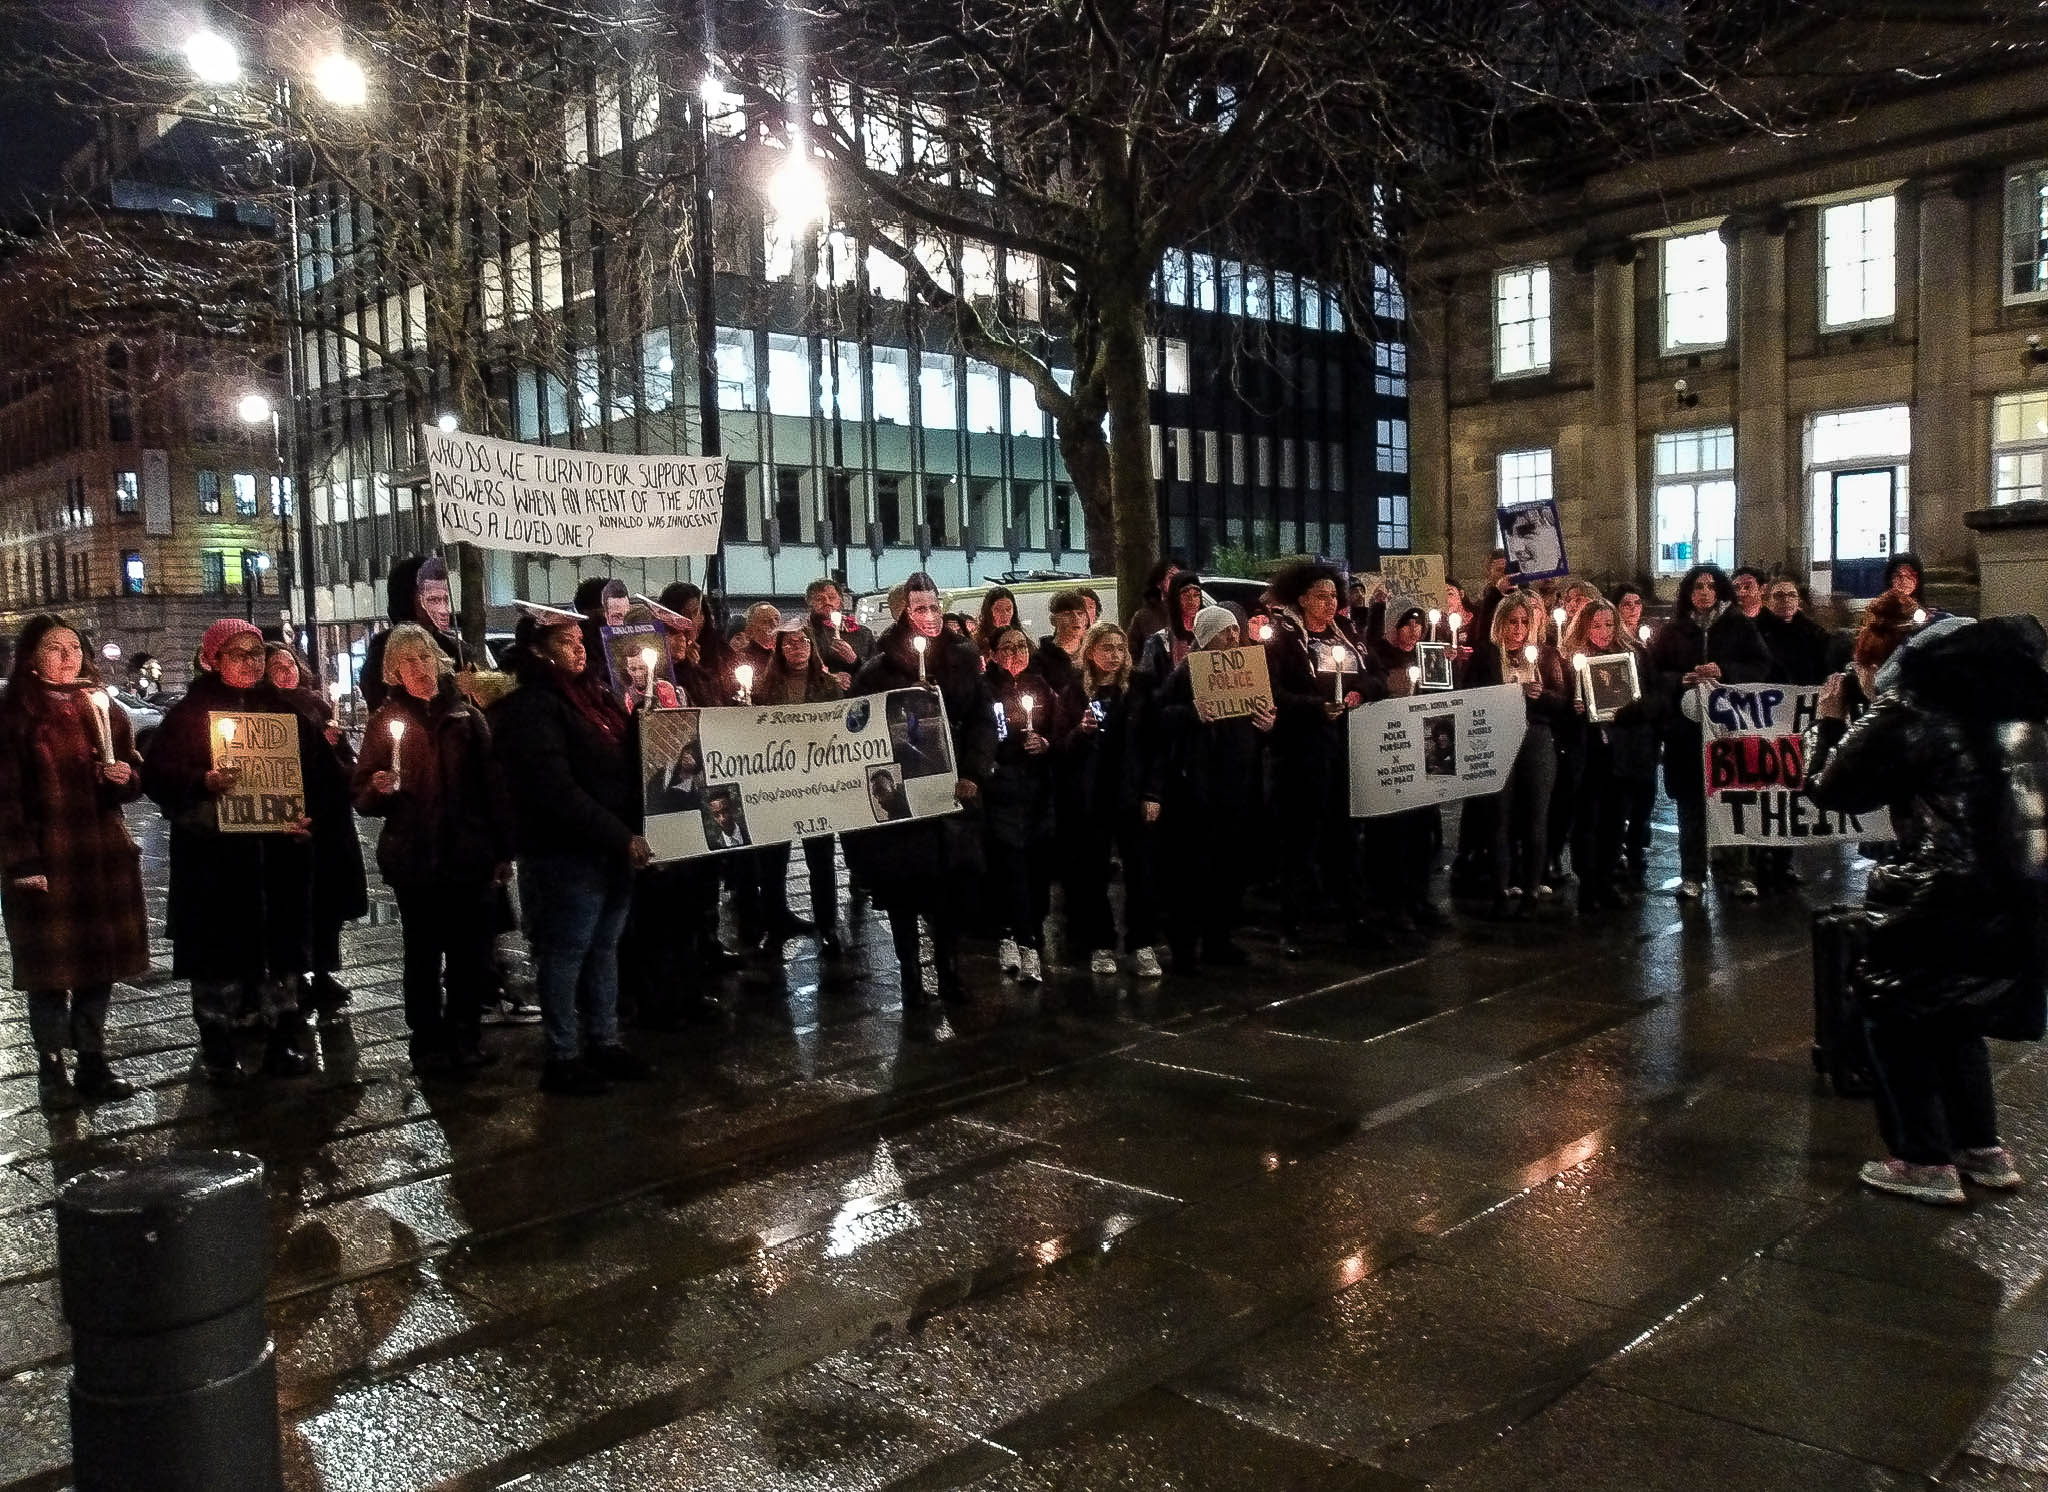 Families and attendees stand in a crowd outside Friends Meeting House, holding banners, lit candles, and homemade carboard signs. They are all wearing coats. The sky is dark, and the pavement is wet from rain. The visible signs say: "End state violence", "End police killings", and "End police pursuits". The visible banners say: "Who do we turn to for support or answers when an egent of the state kills a loved one? Ronaldo was innocent", "#RonsWorld. Ronaldo Johnson. R.I.P.", and "G.M.P. have blood on their hands."